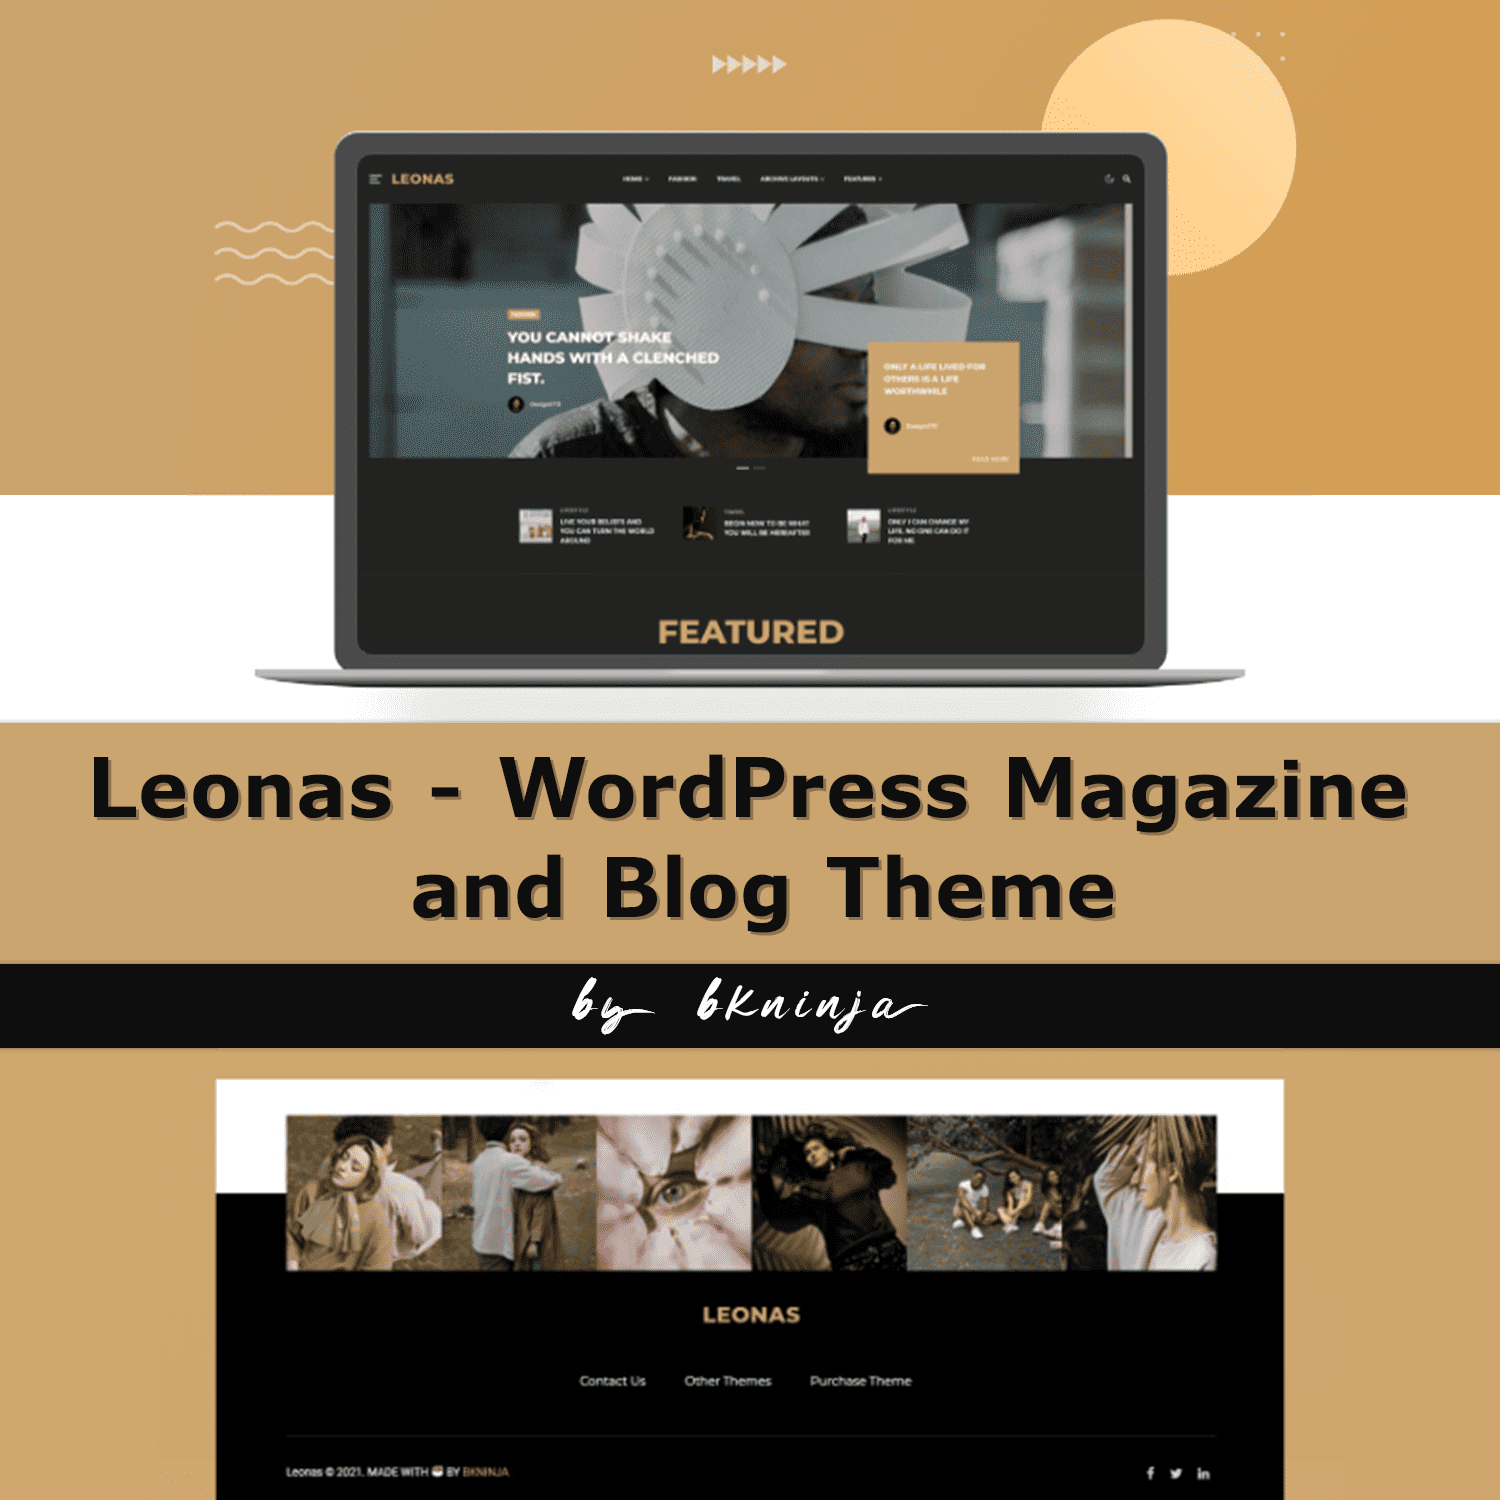 Preview featured of Leonas on the laptop.